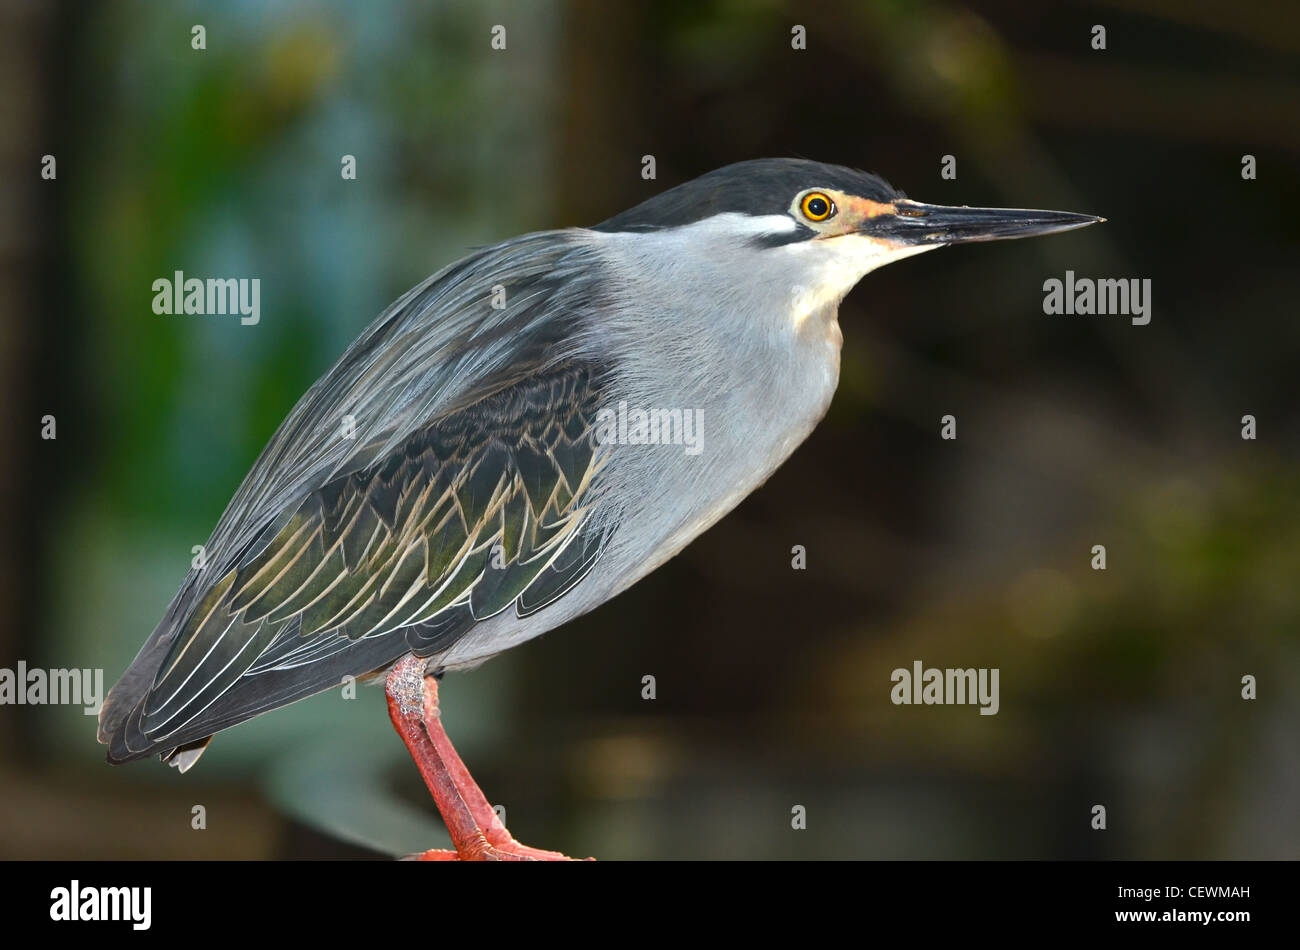 Portait in profile of a green heron from south america Stock Photo